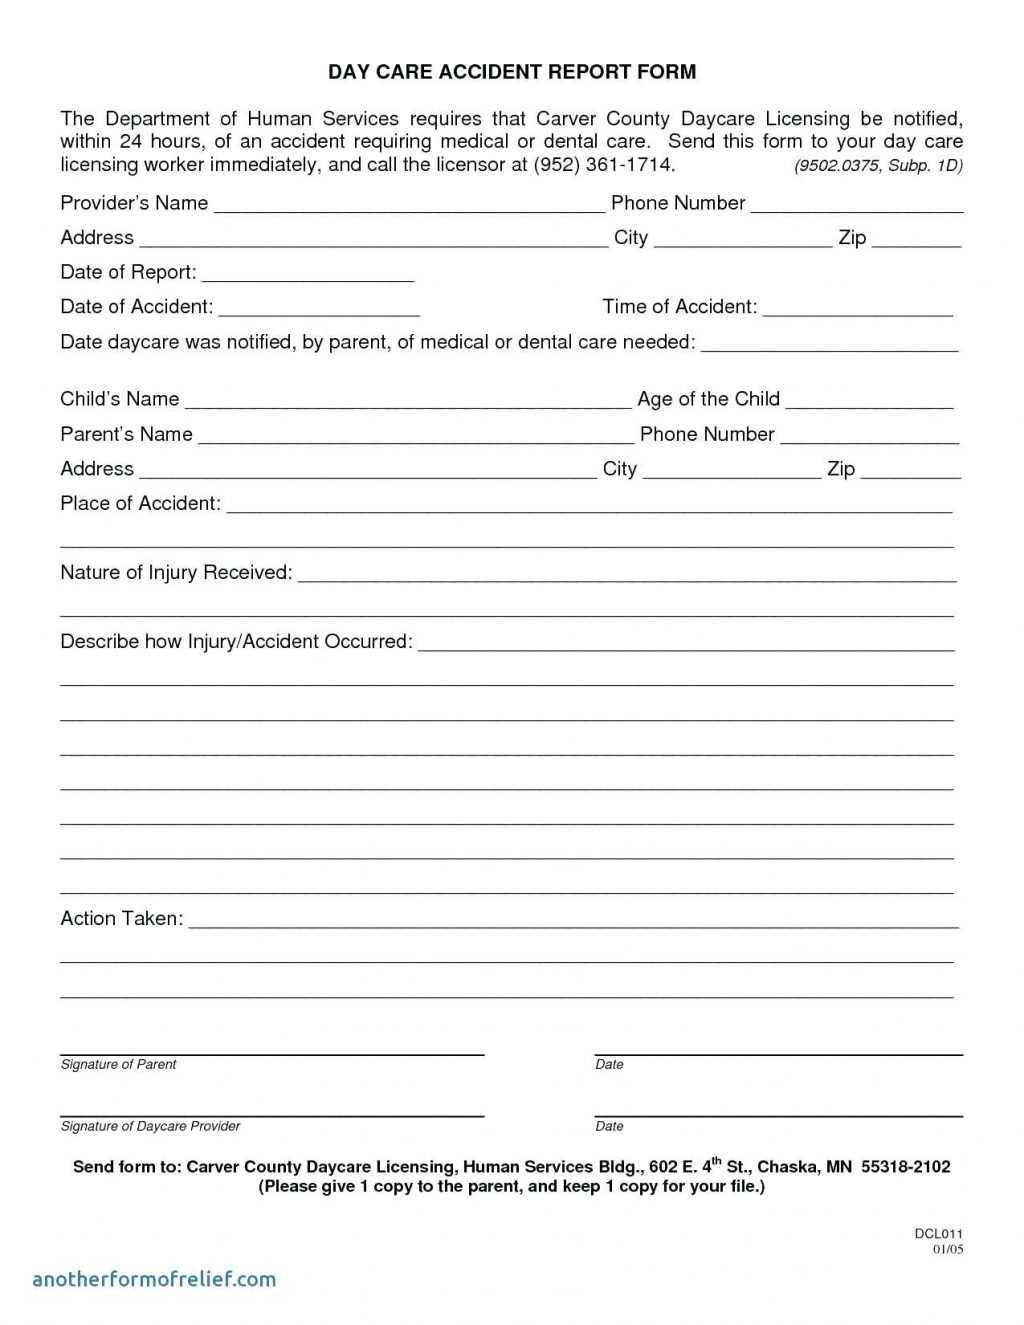 Fire Incident Report Form Pdf Format Word Employee Osha Intended For Accident Report Form Template Uk